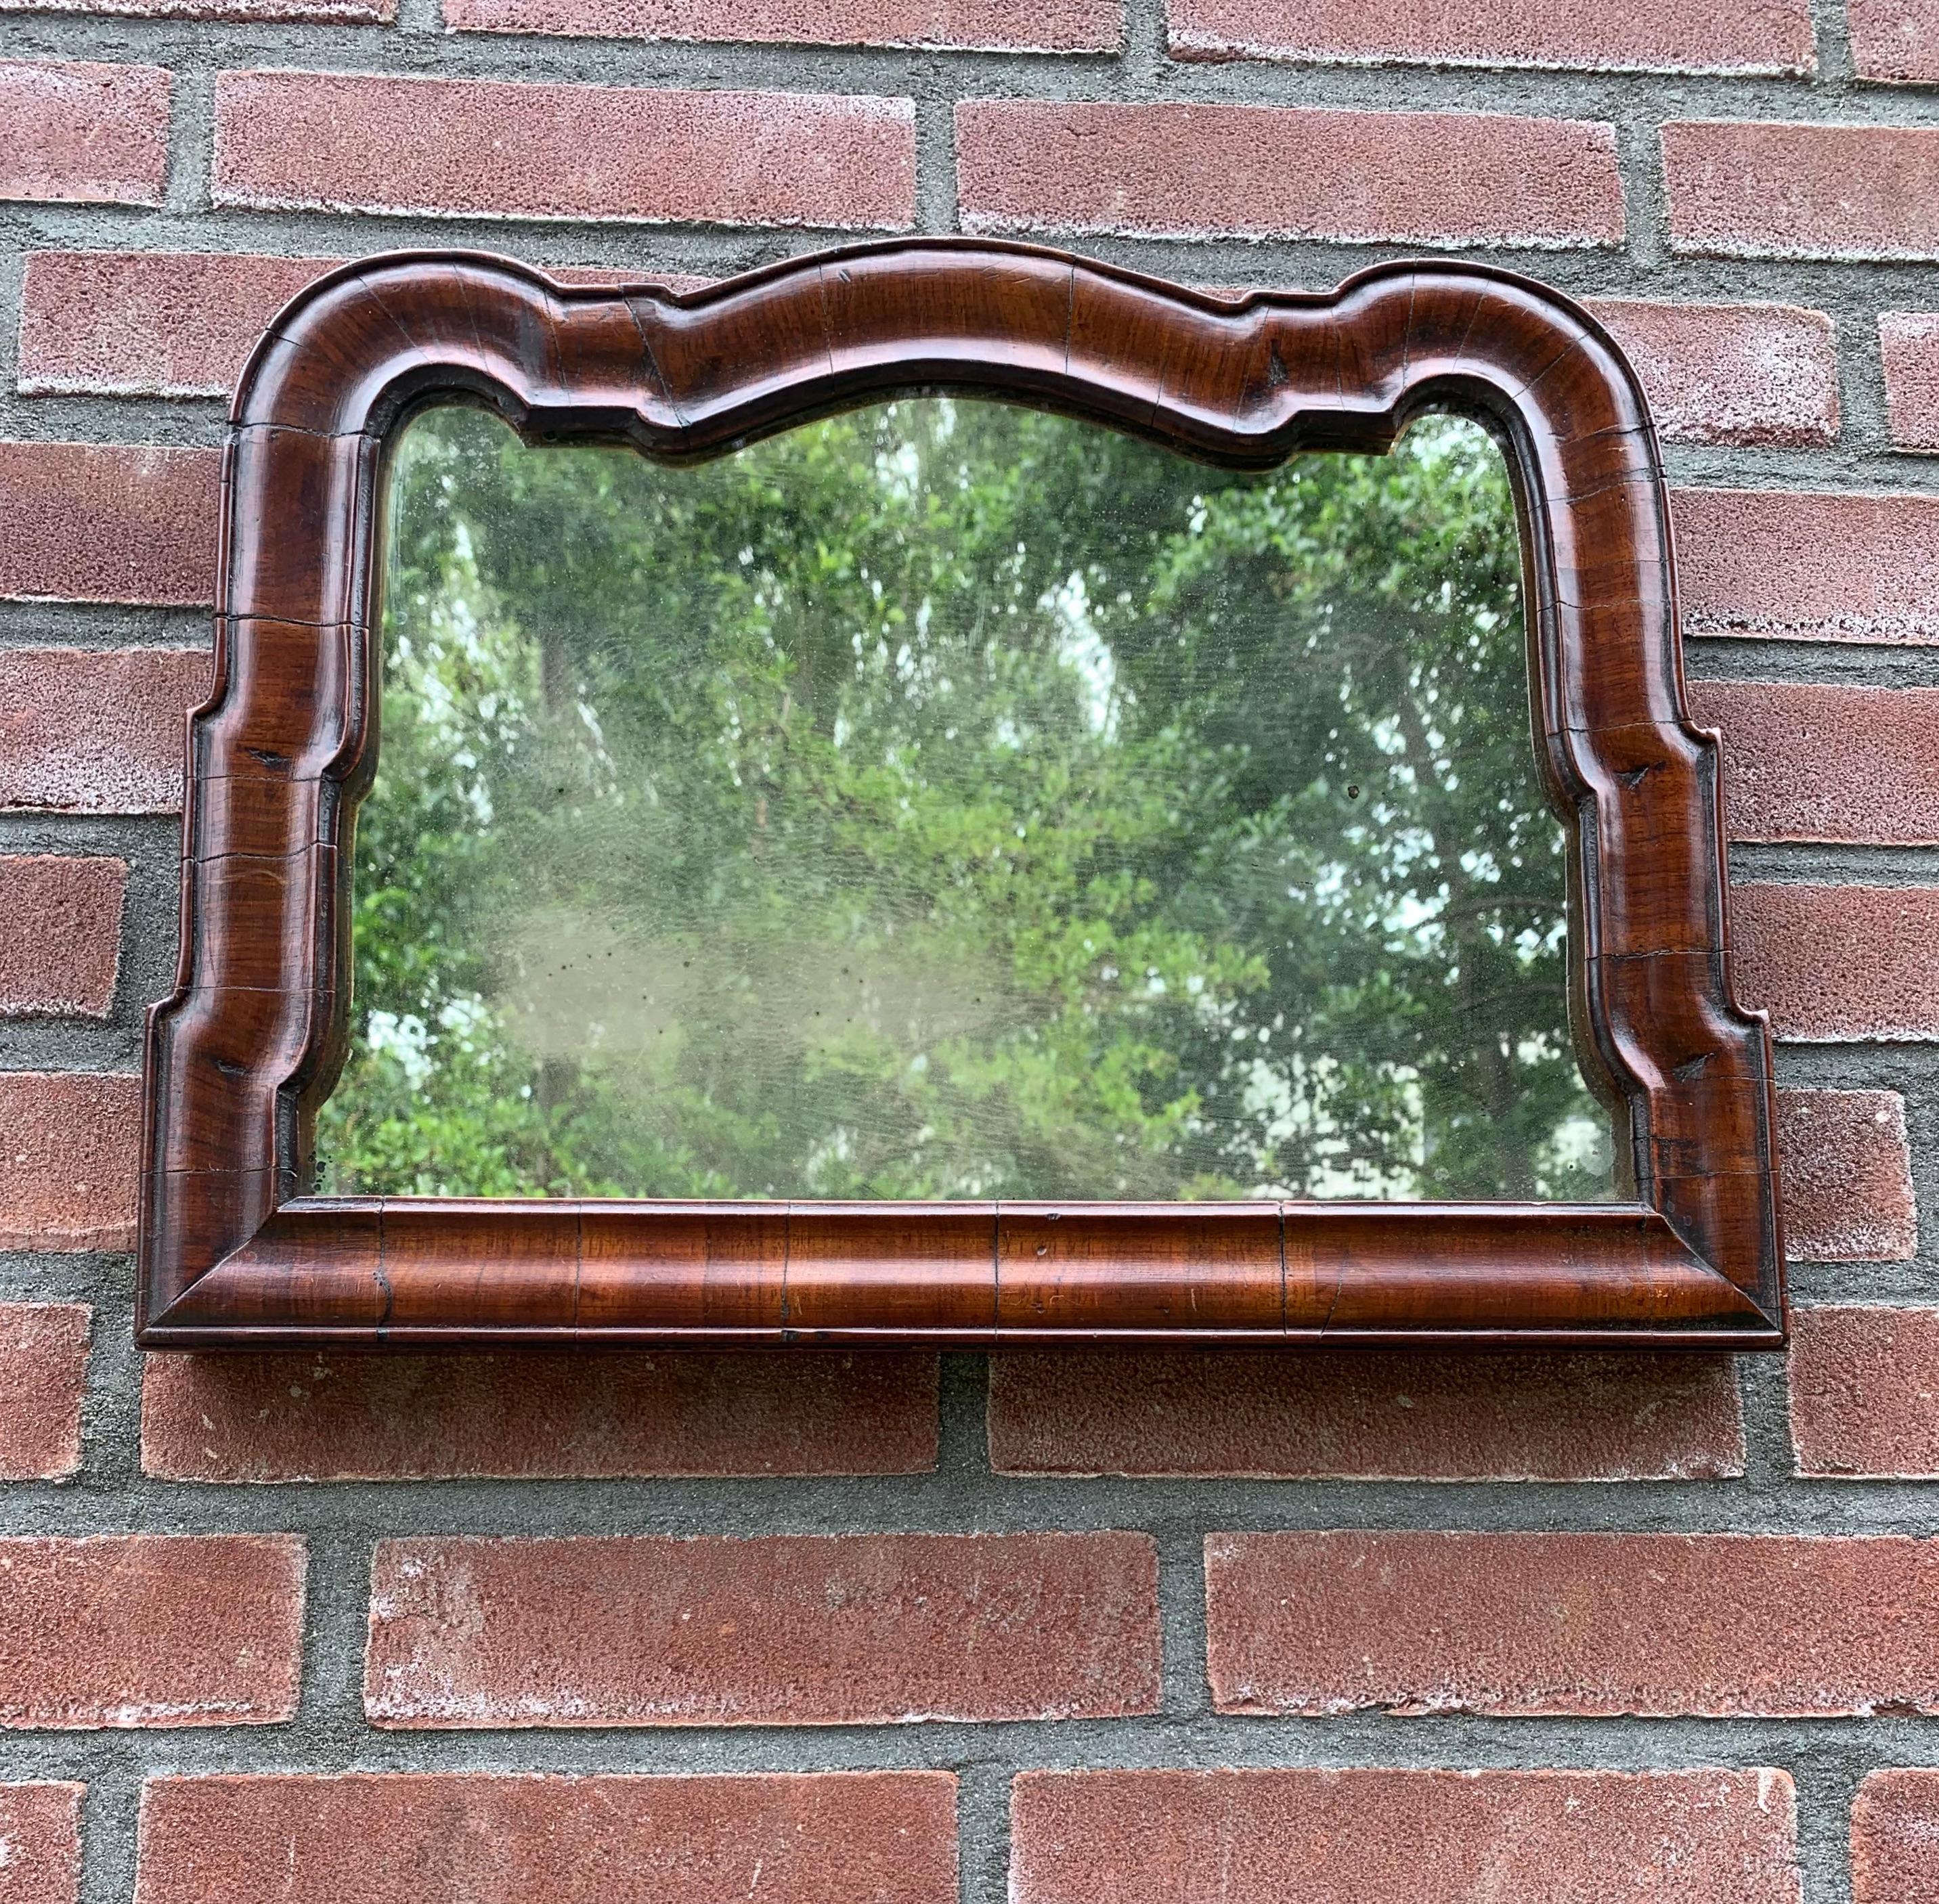 Small size and stunning mirror from the late 1700s.

This very old wall mirror has a truly wonderful shape and patina. The rich warm color (also known as patina) is what attracts enthousiast from all over the world to antique pieces, because it